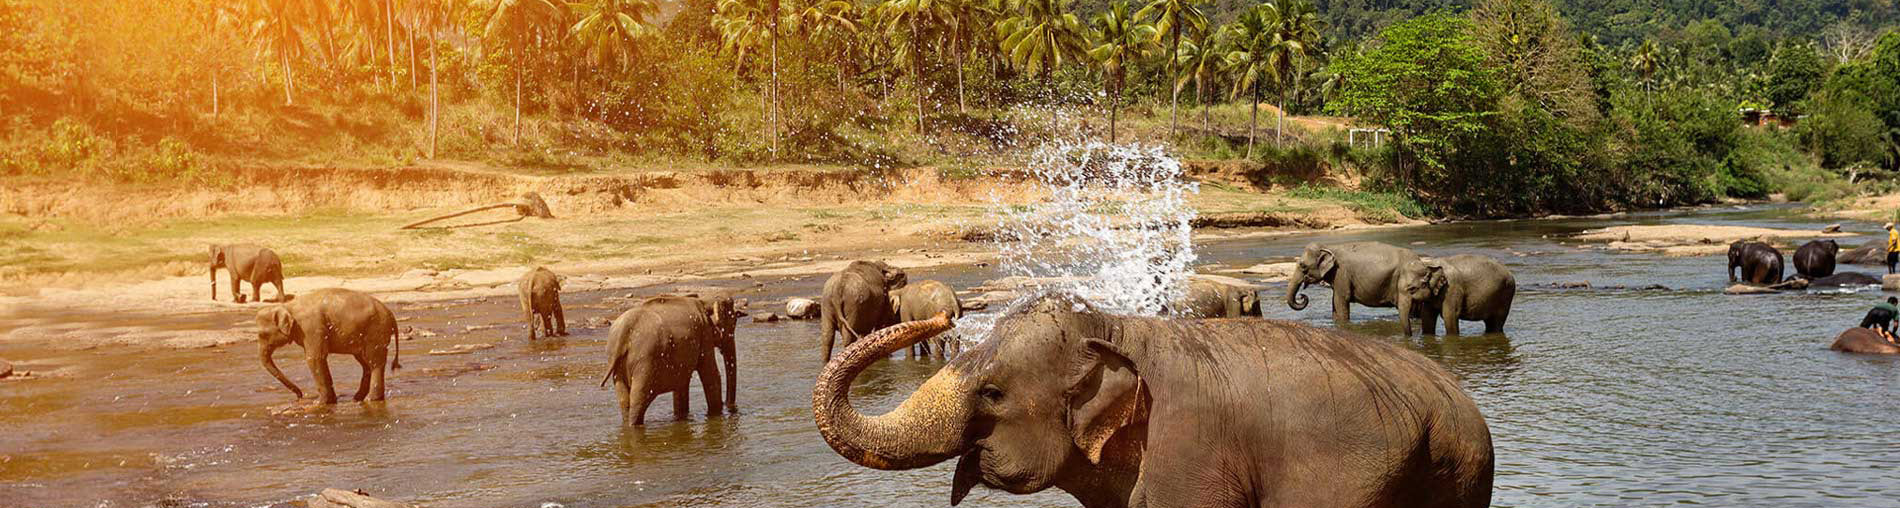 Sri Lanka Holiday Tour Packages From India